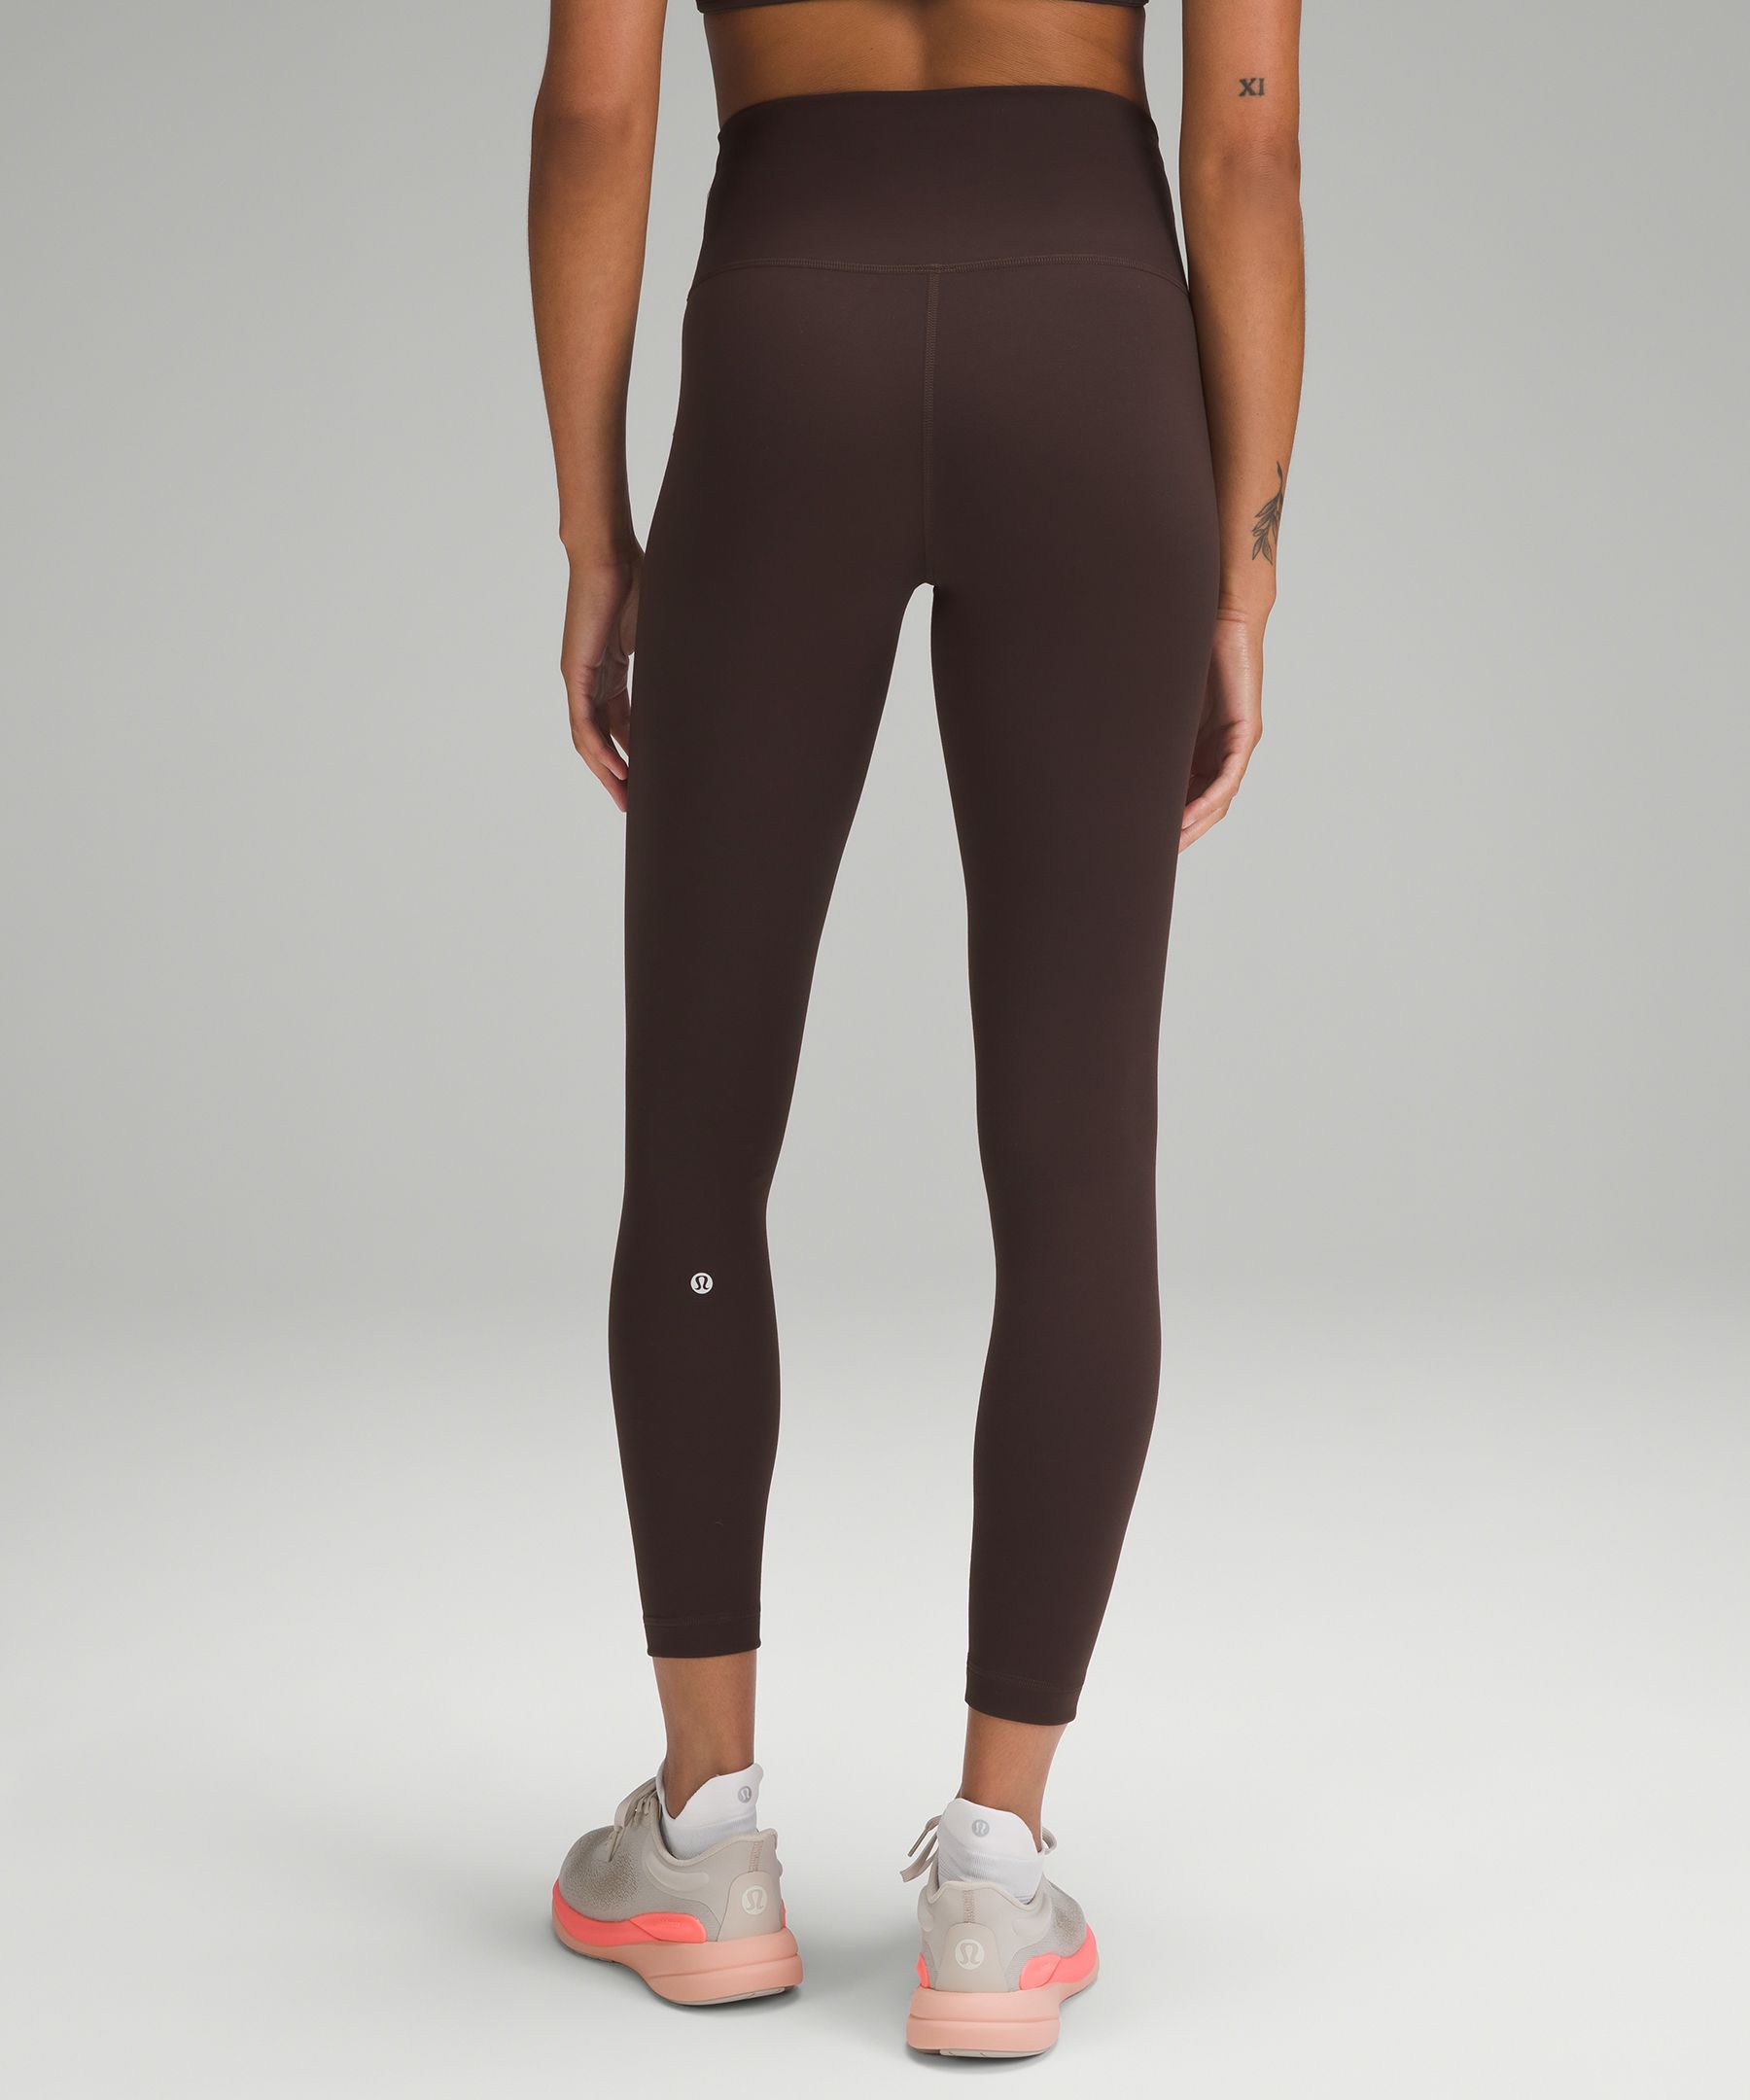 Lululemon Wunder Train High-Rise Tight 25 Undertone Black Multi Size 8 NWT  - $89 New With Tags - From Anna